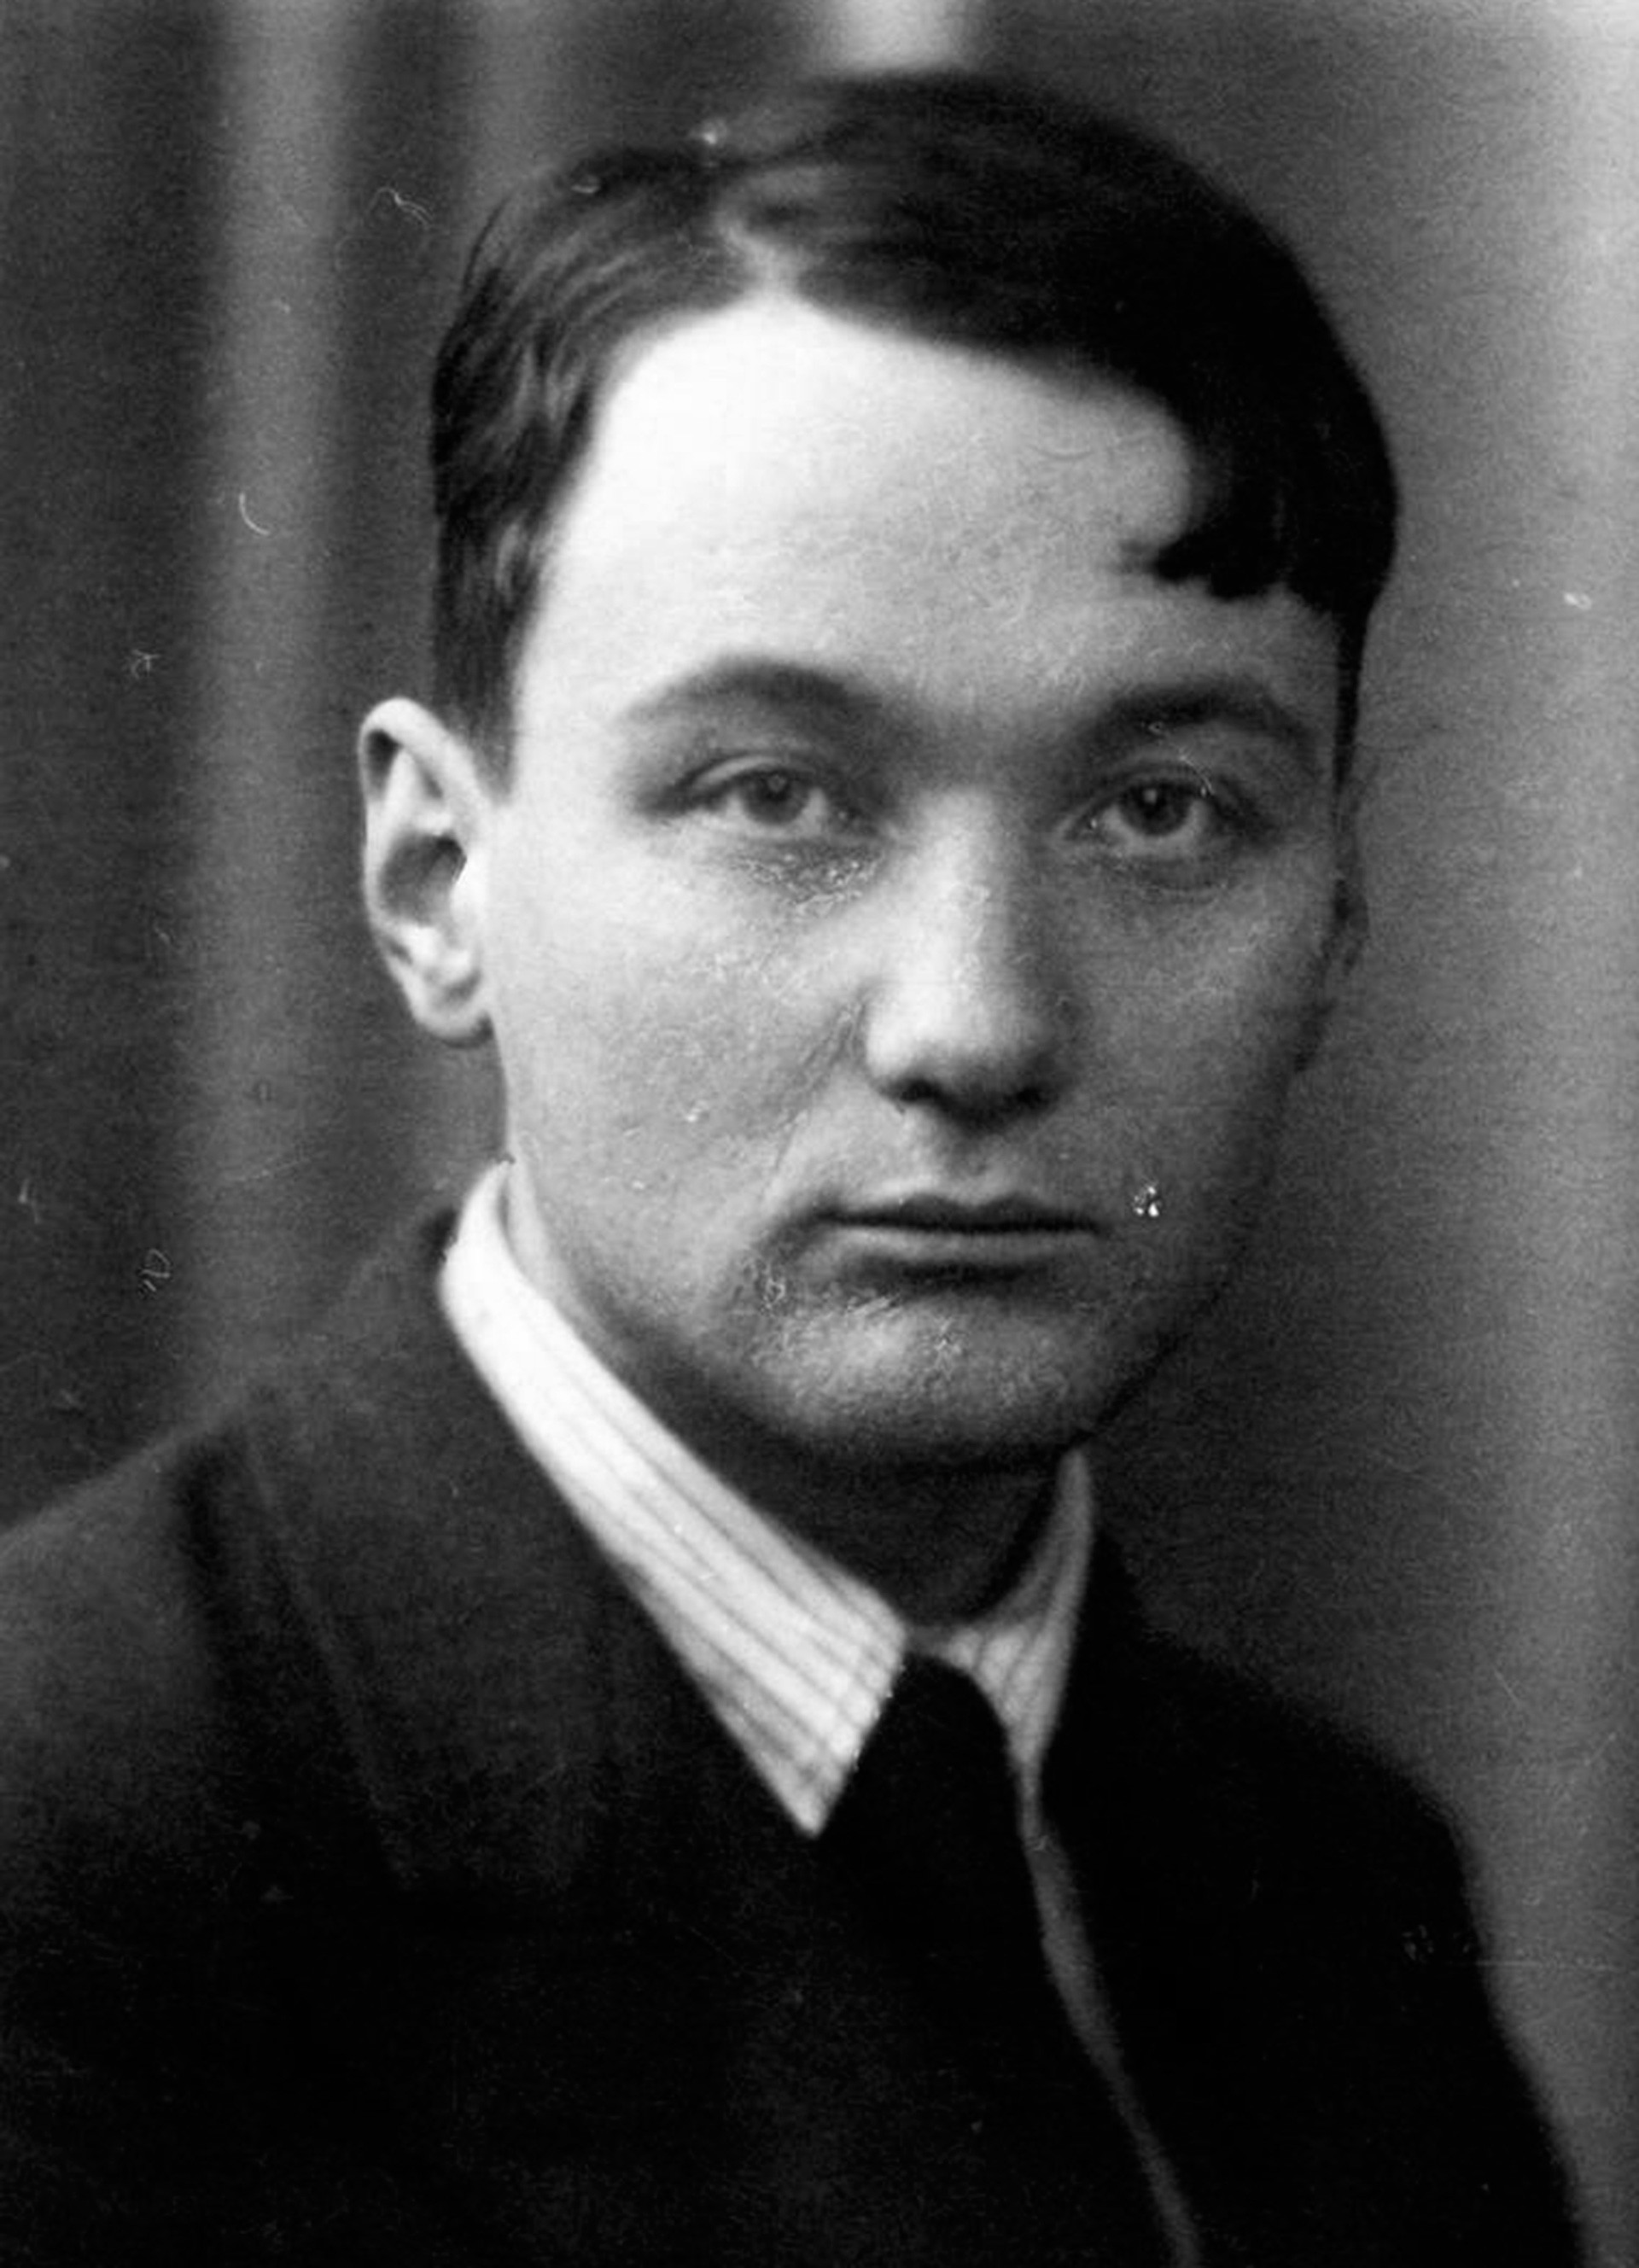 Young Lev Gumilev in 1934.